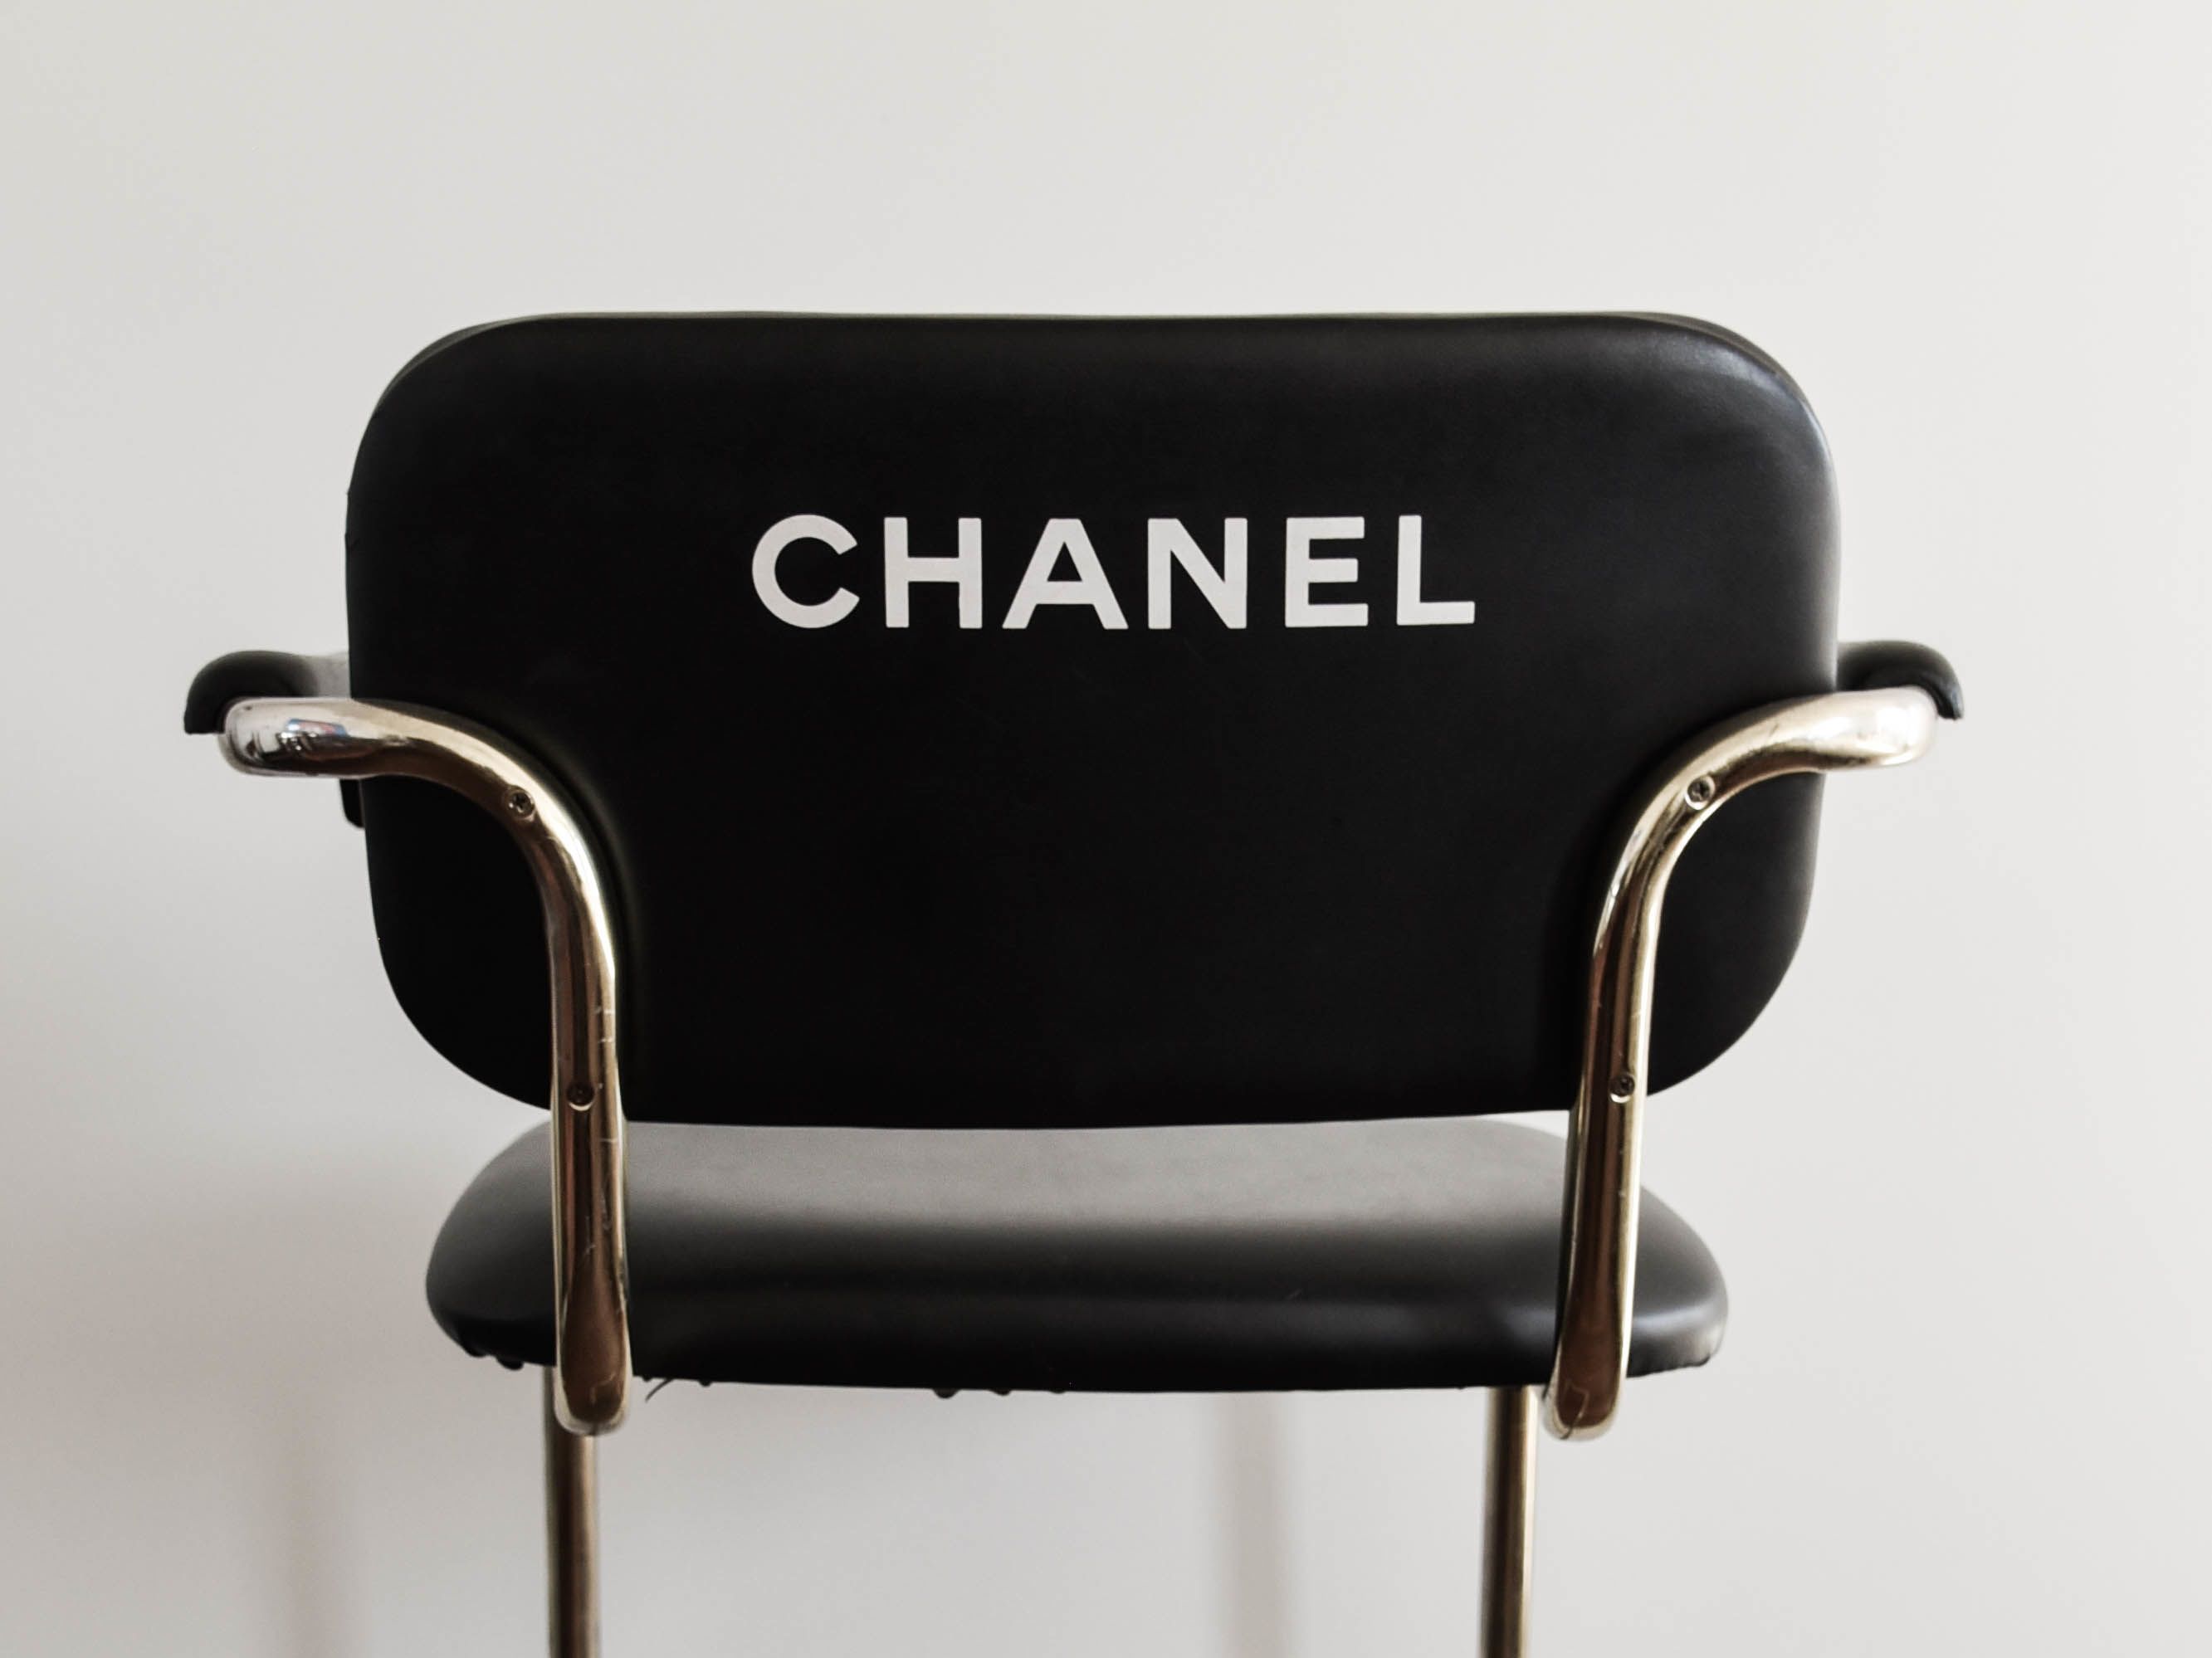 Chanel Makeup Chair Bar Stool - Apartment Therapy's